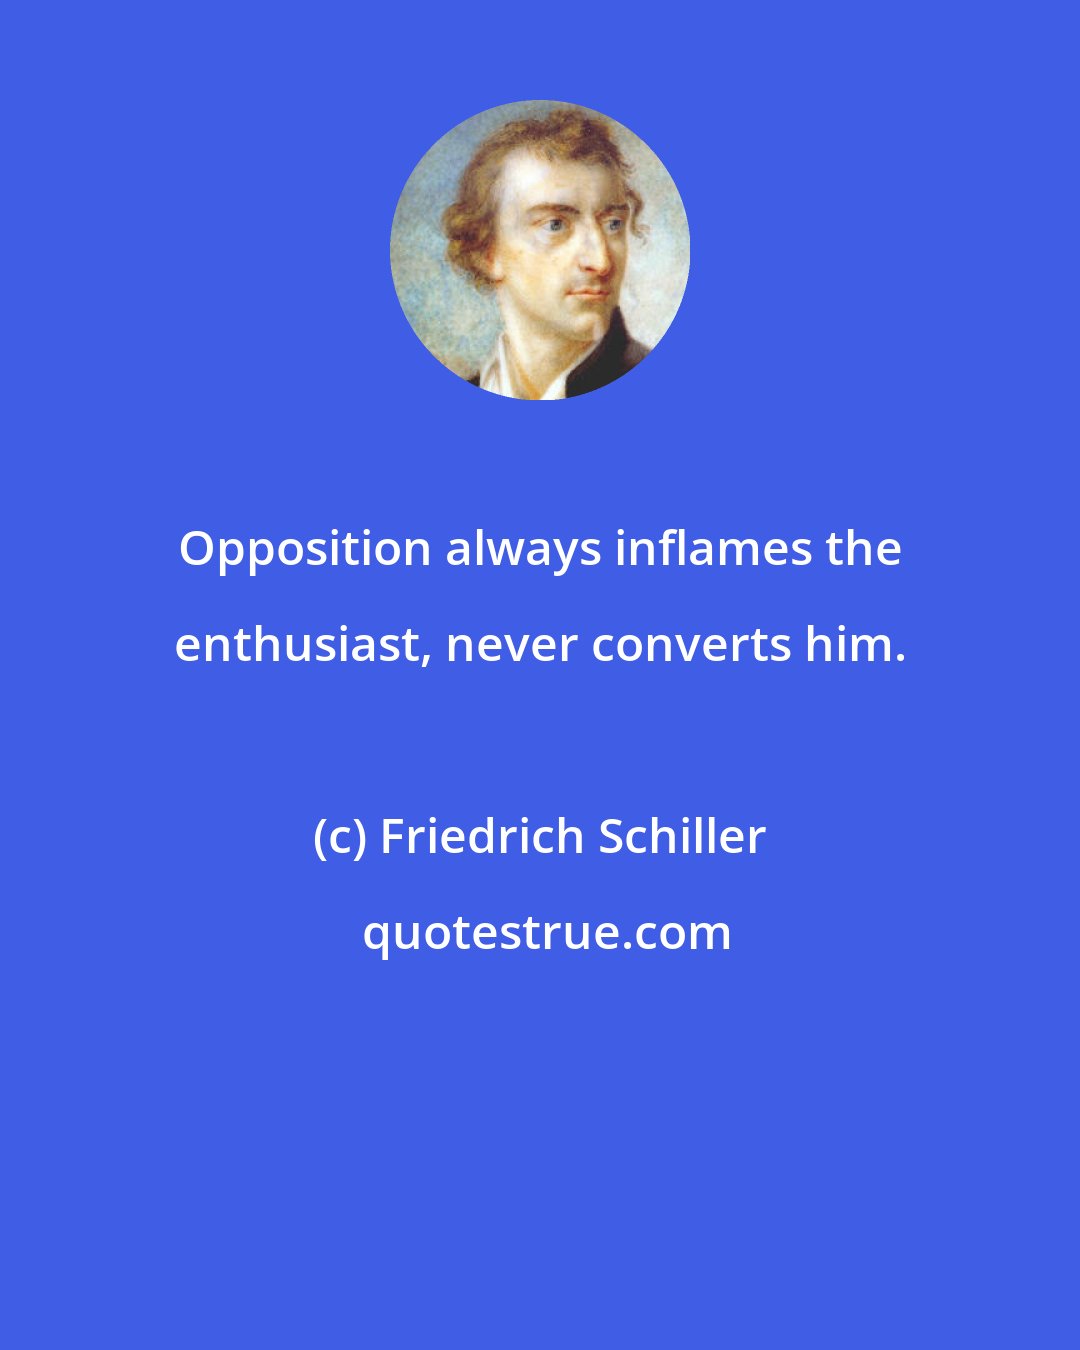 Friedrich Schiller: Opposition always inflames the enthusiast, never converts him.